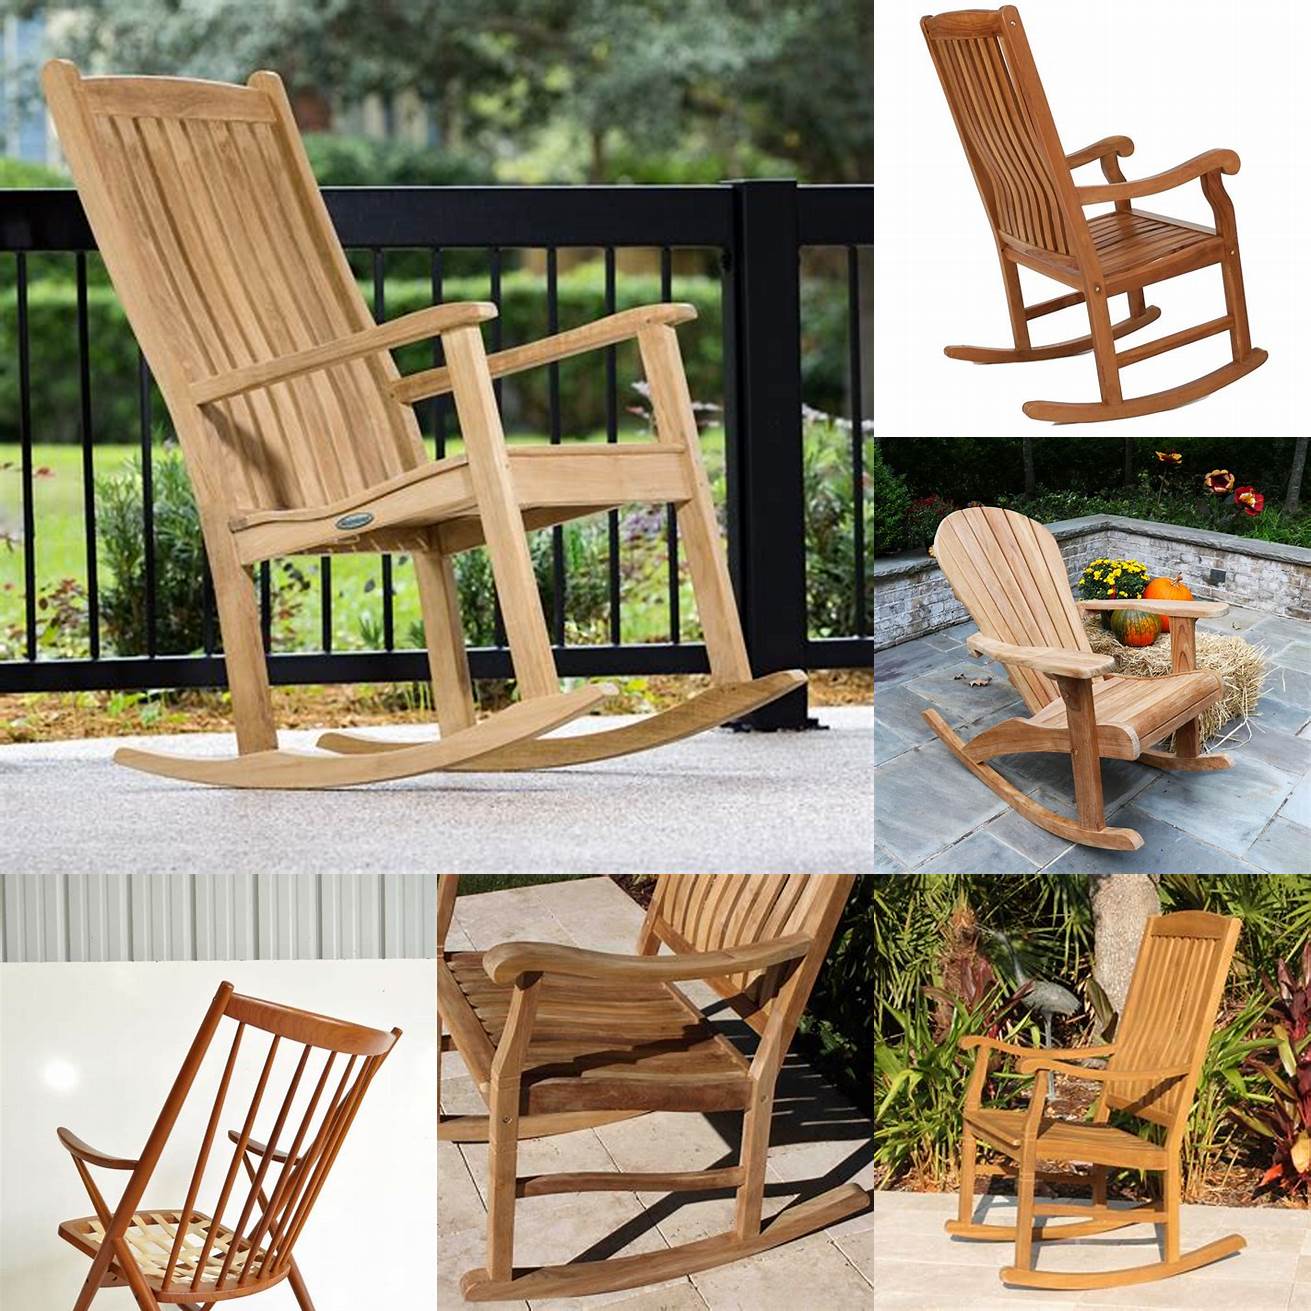 A picture of a teak rocking chair with a protective sealant